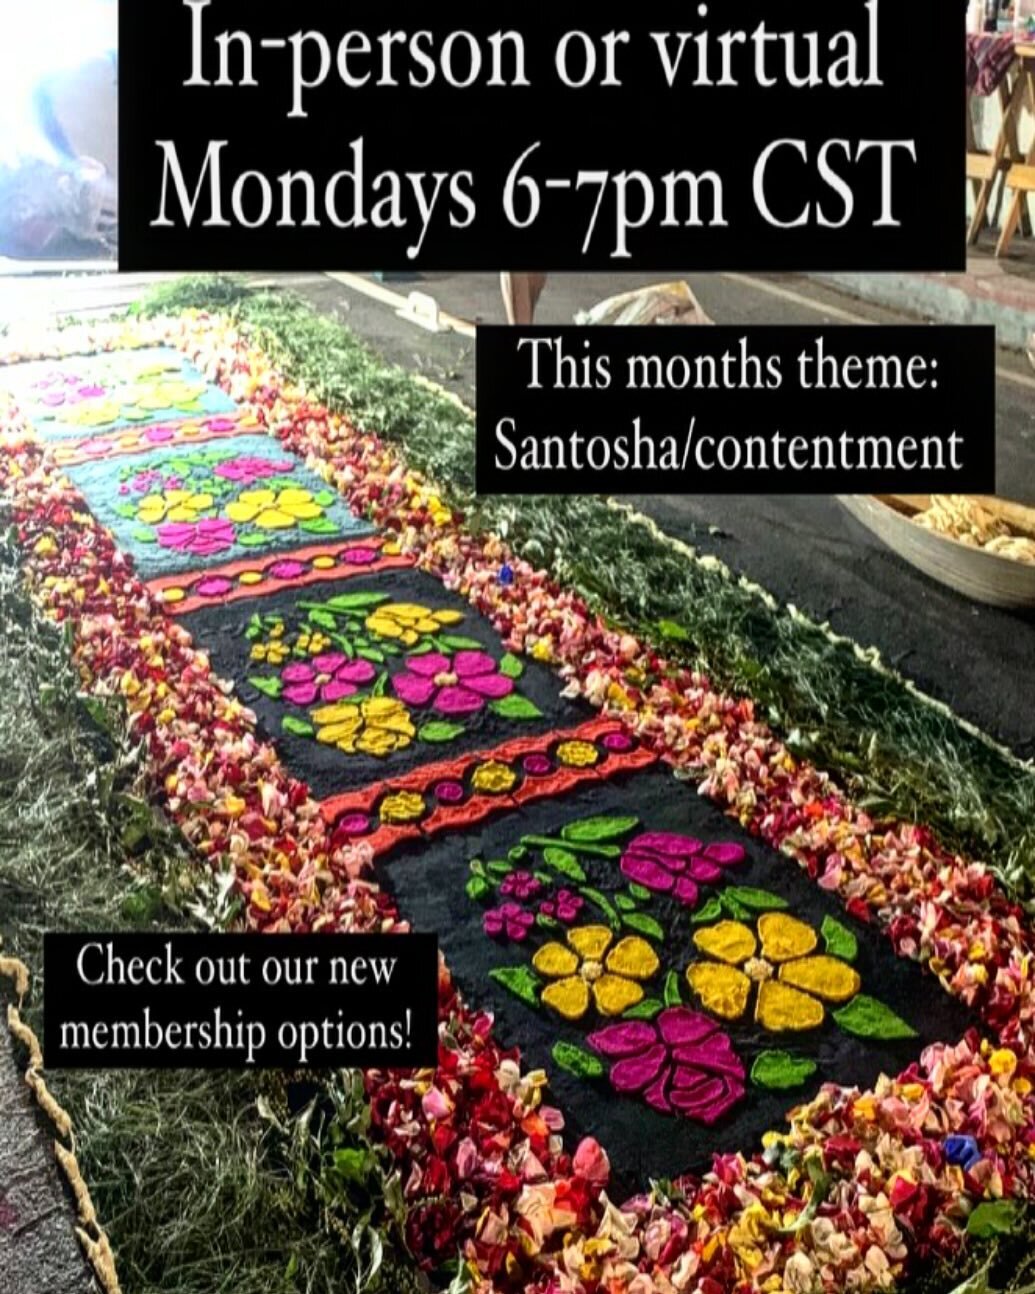 &ldquo;✨ Experience the transformative power of Kundalini every Monday at 6pm CST, as we explore the theme of Santosha (contentment). 🌟 Join us in person or online for an enriching session where you&rsquo;ll not only learn but also experience the bl